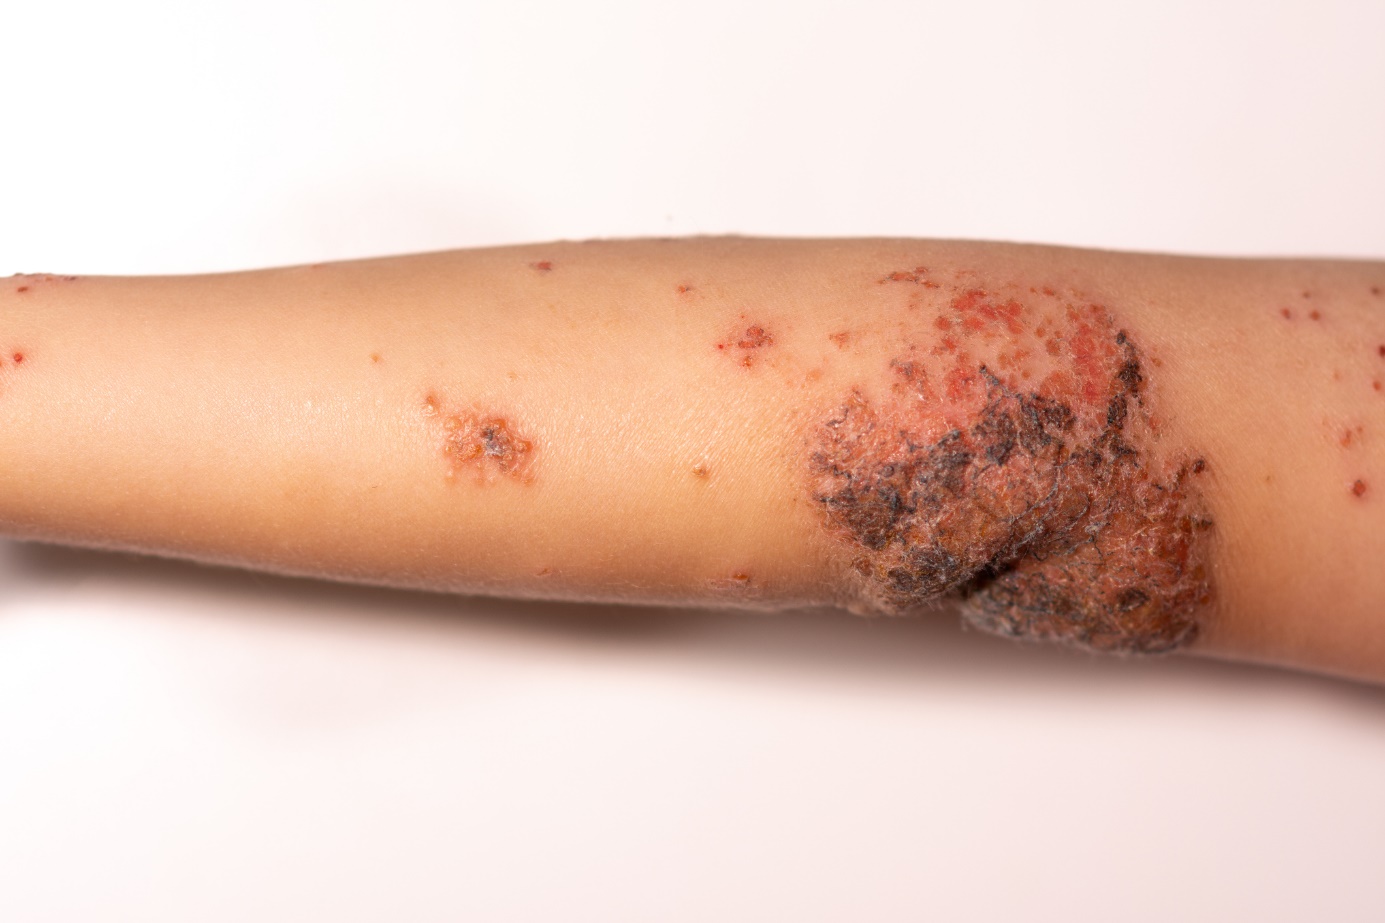 An example of what impetigo can look like